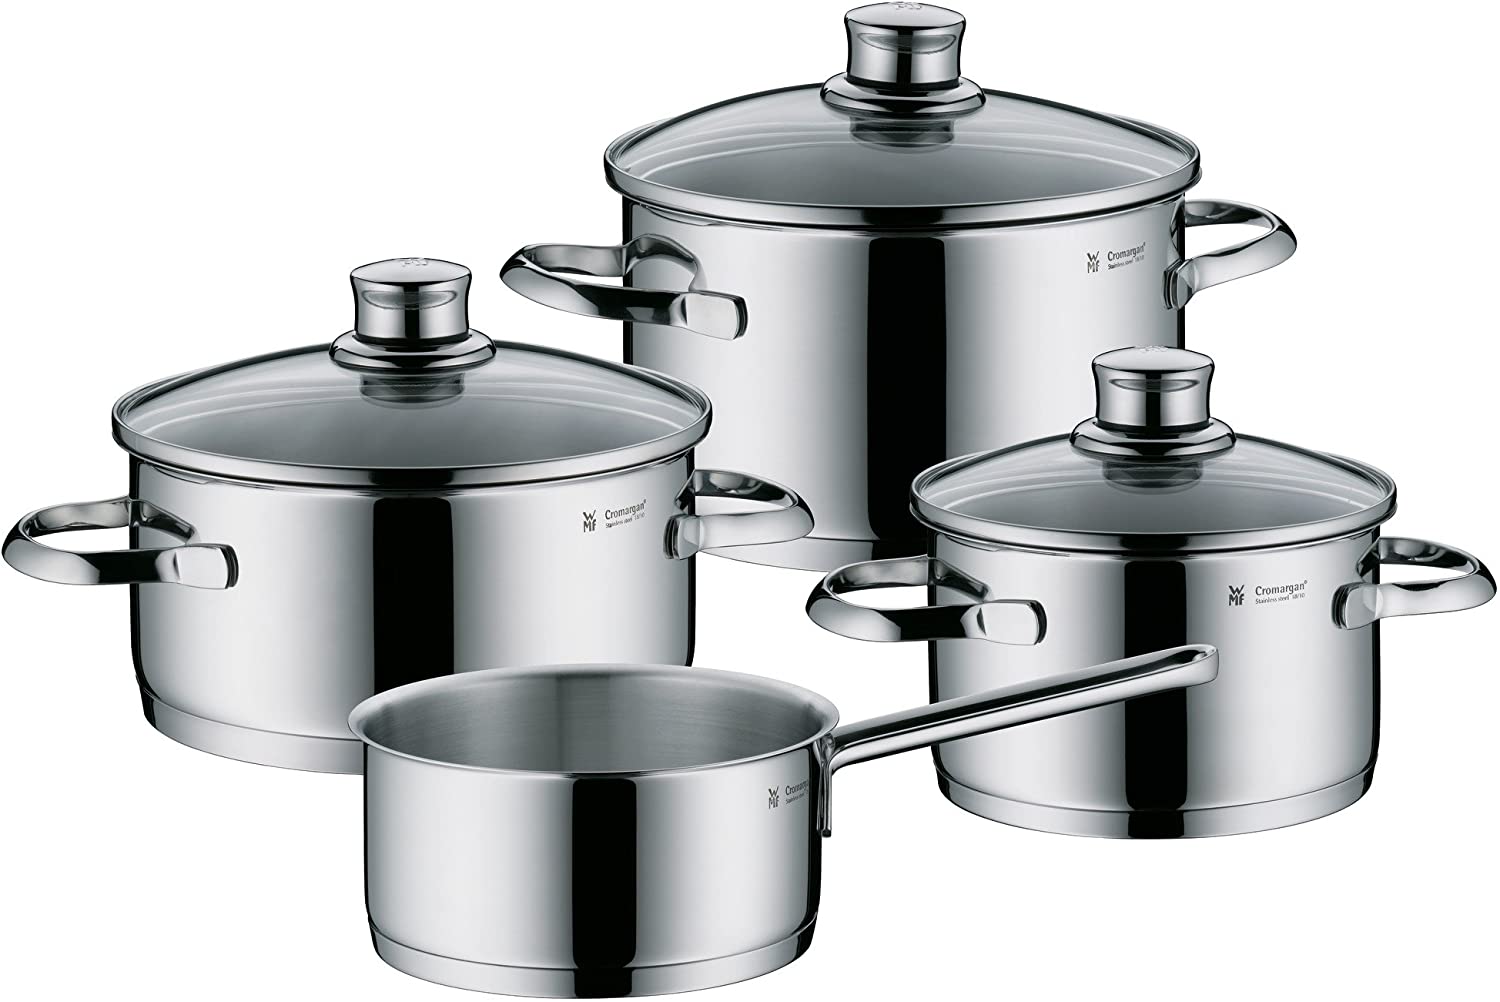 WMF Saucepan Set 4-Piece Sapphire Edge Glass Lid Polished Stainless Steel Suitable for Induction Cookers Dishwasher Safe